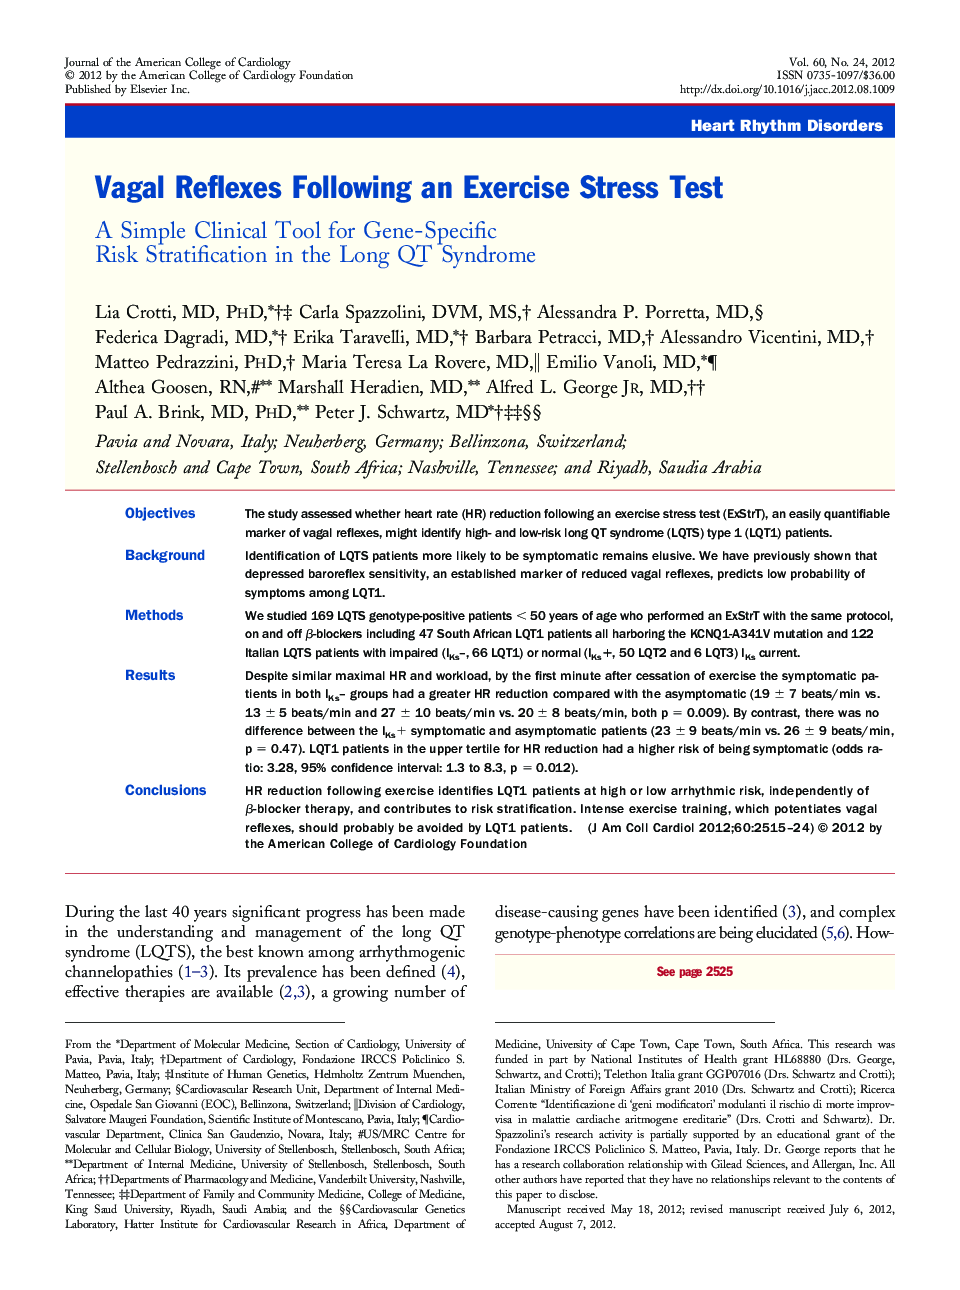 Vagal Reflexes Following an Exercise Stress Test : A Simple Clinical Tool for Gene-Specific Risk Stratification in the Long QT Syndrome